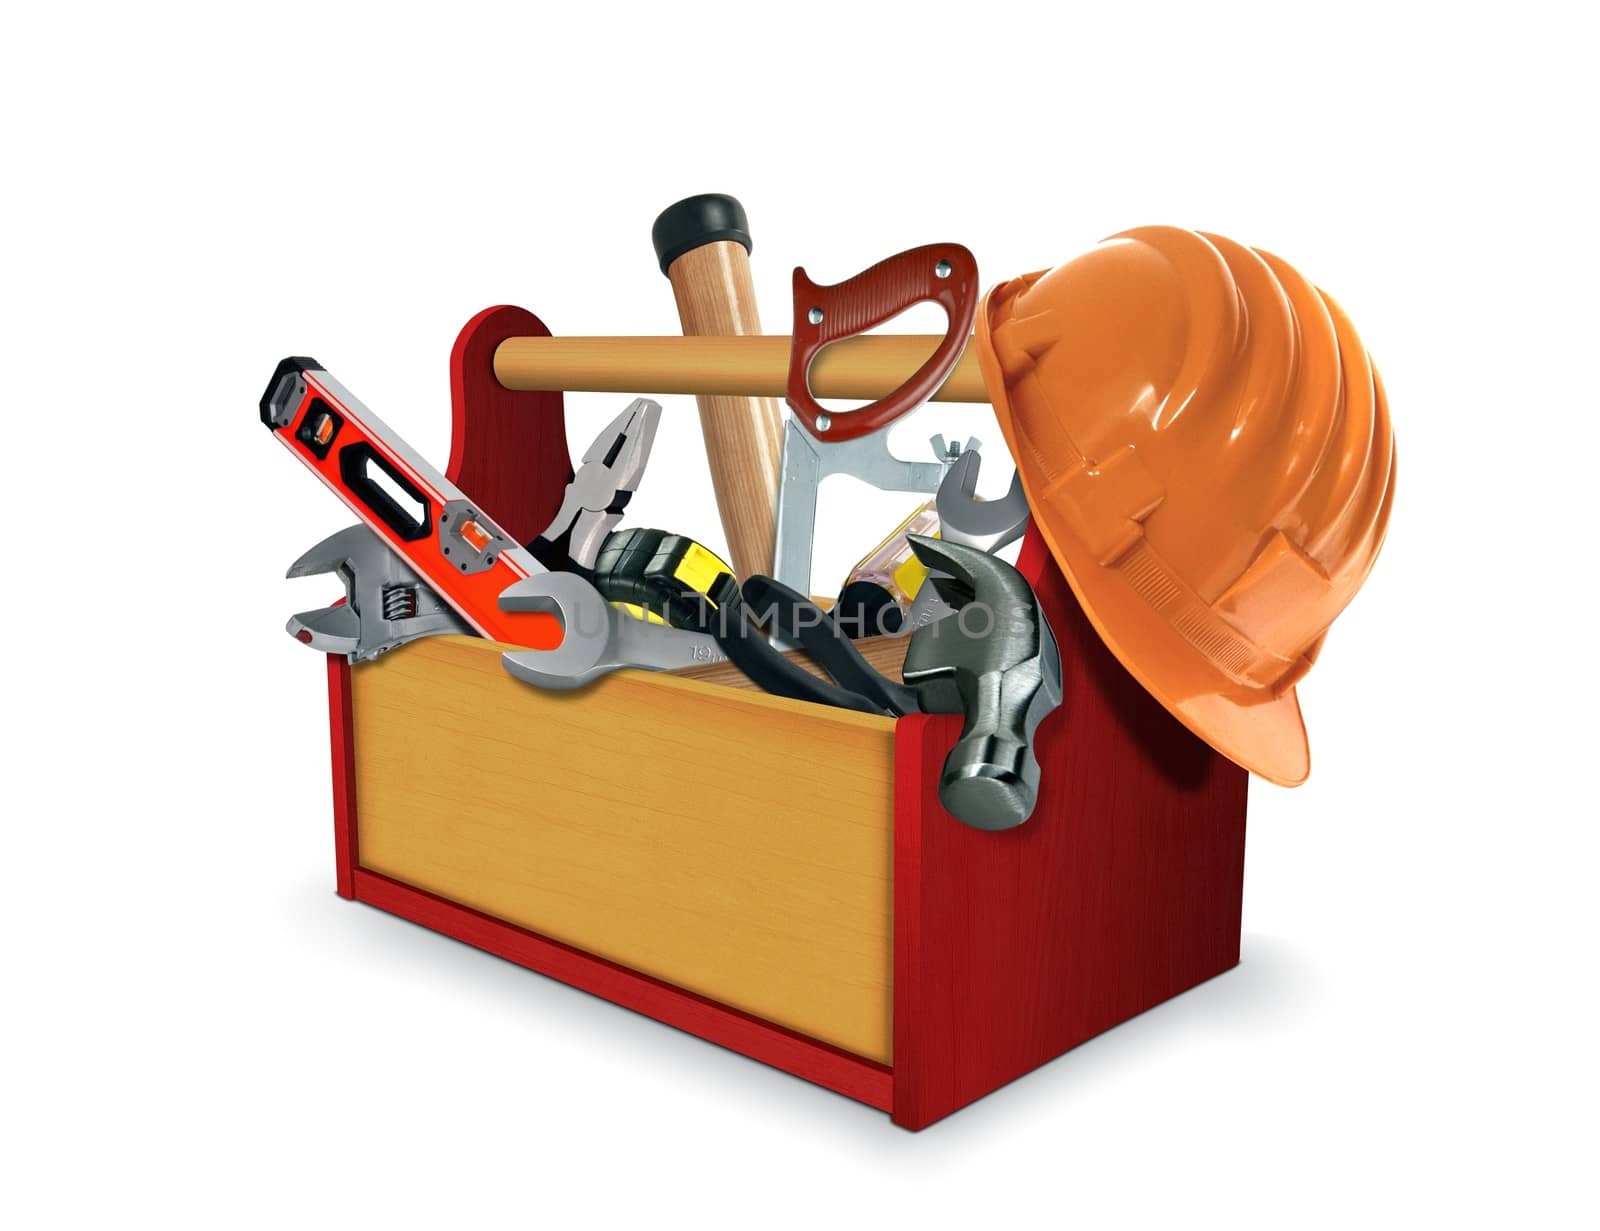 Tool Box with Tools by razihusin